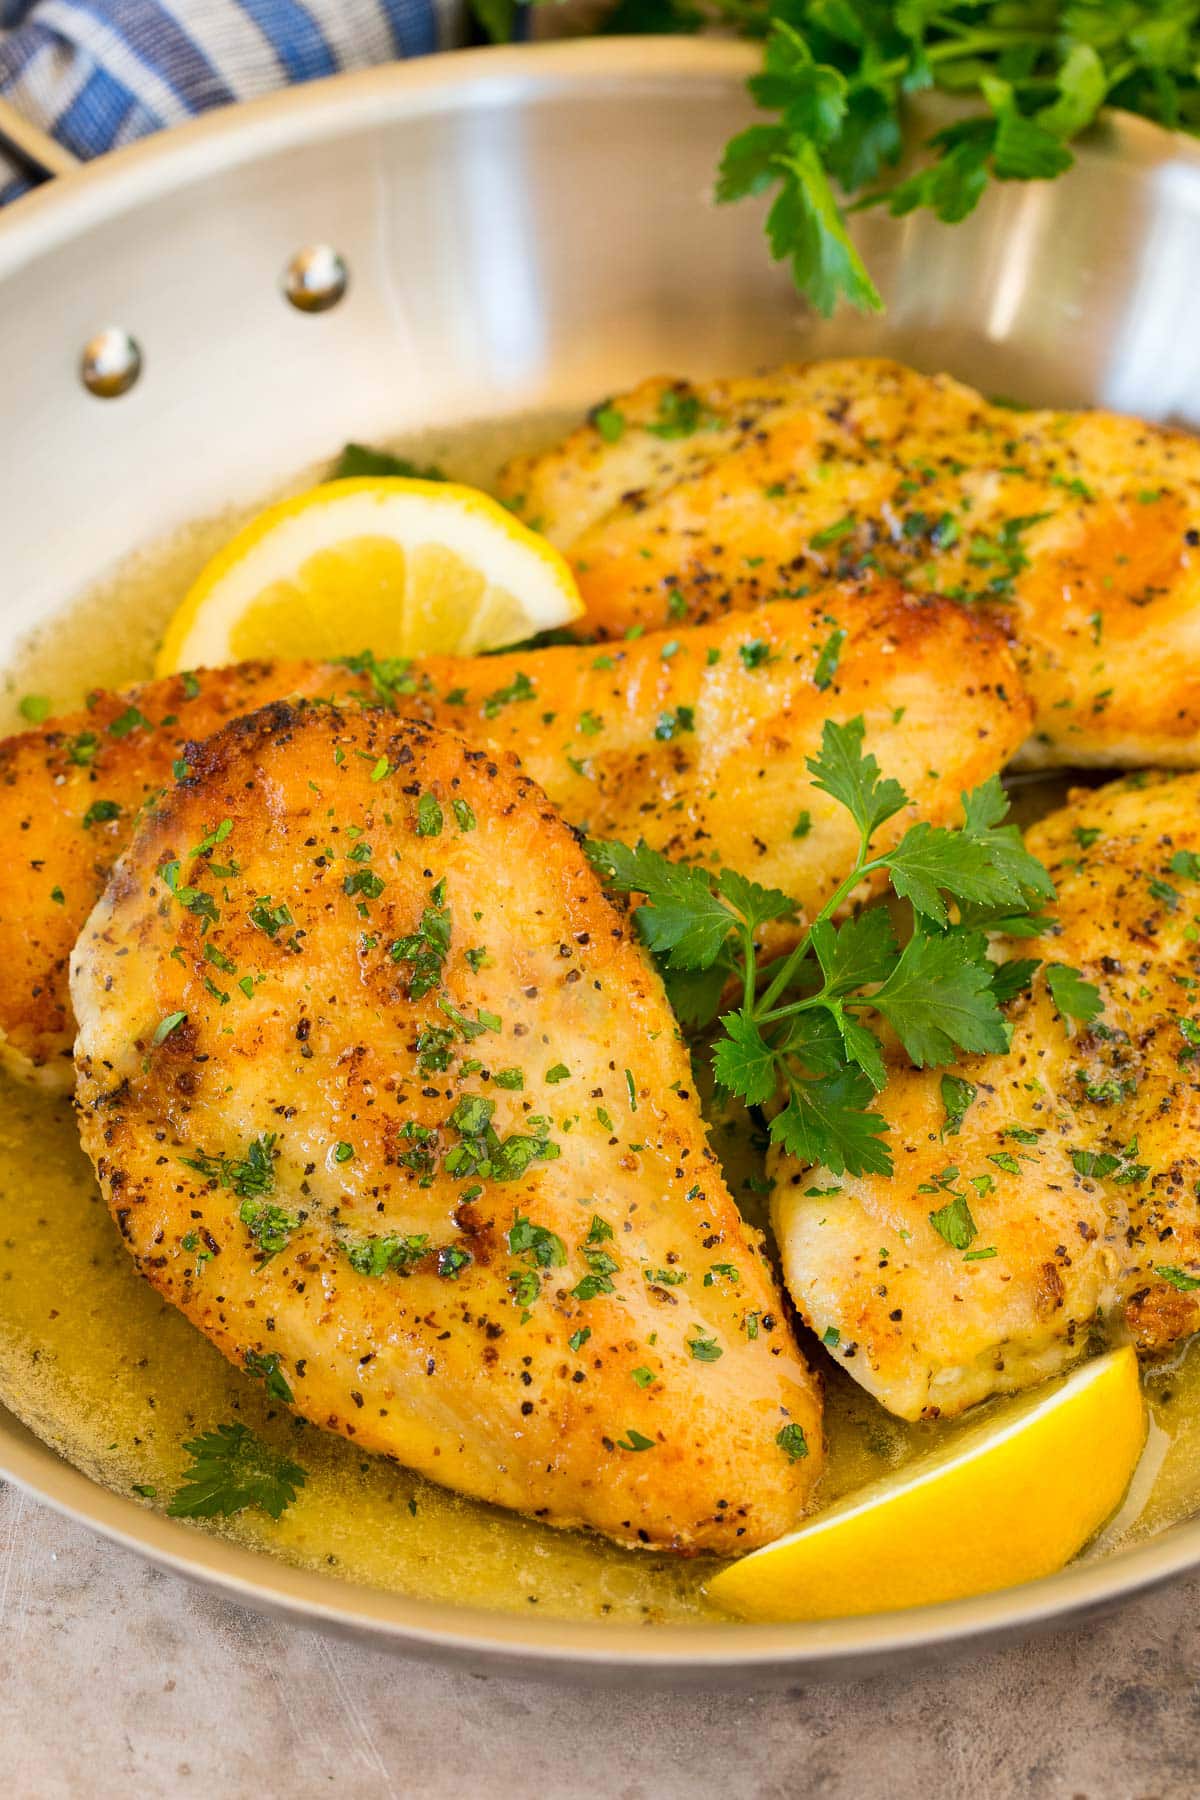 A pan of lemon pepper chicken garnished with parsley and lemons.